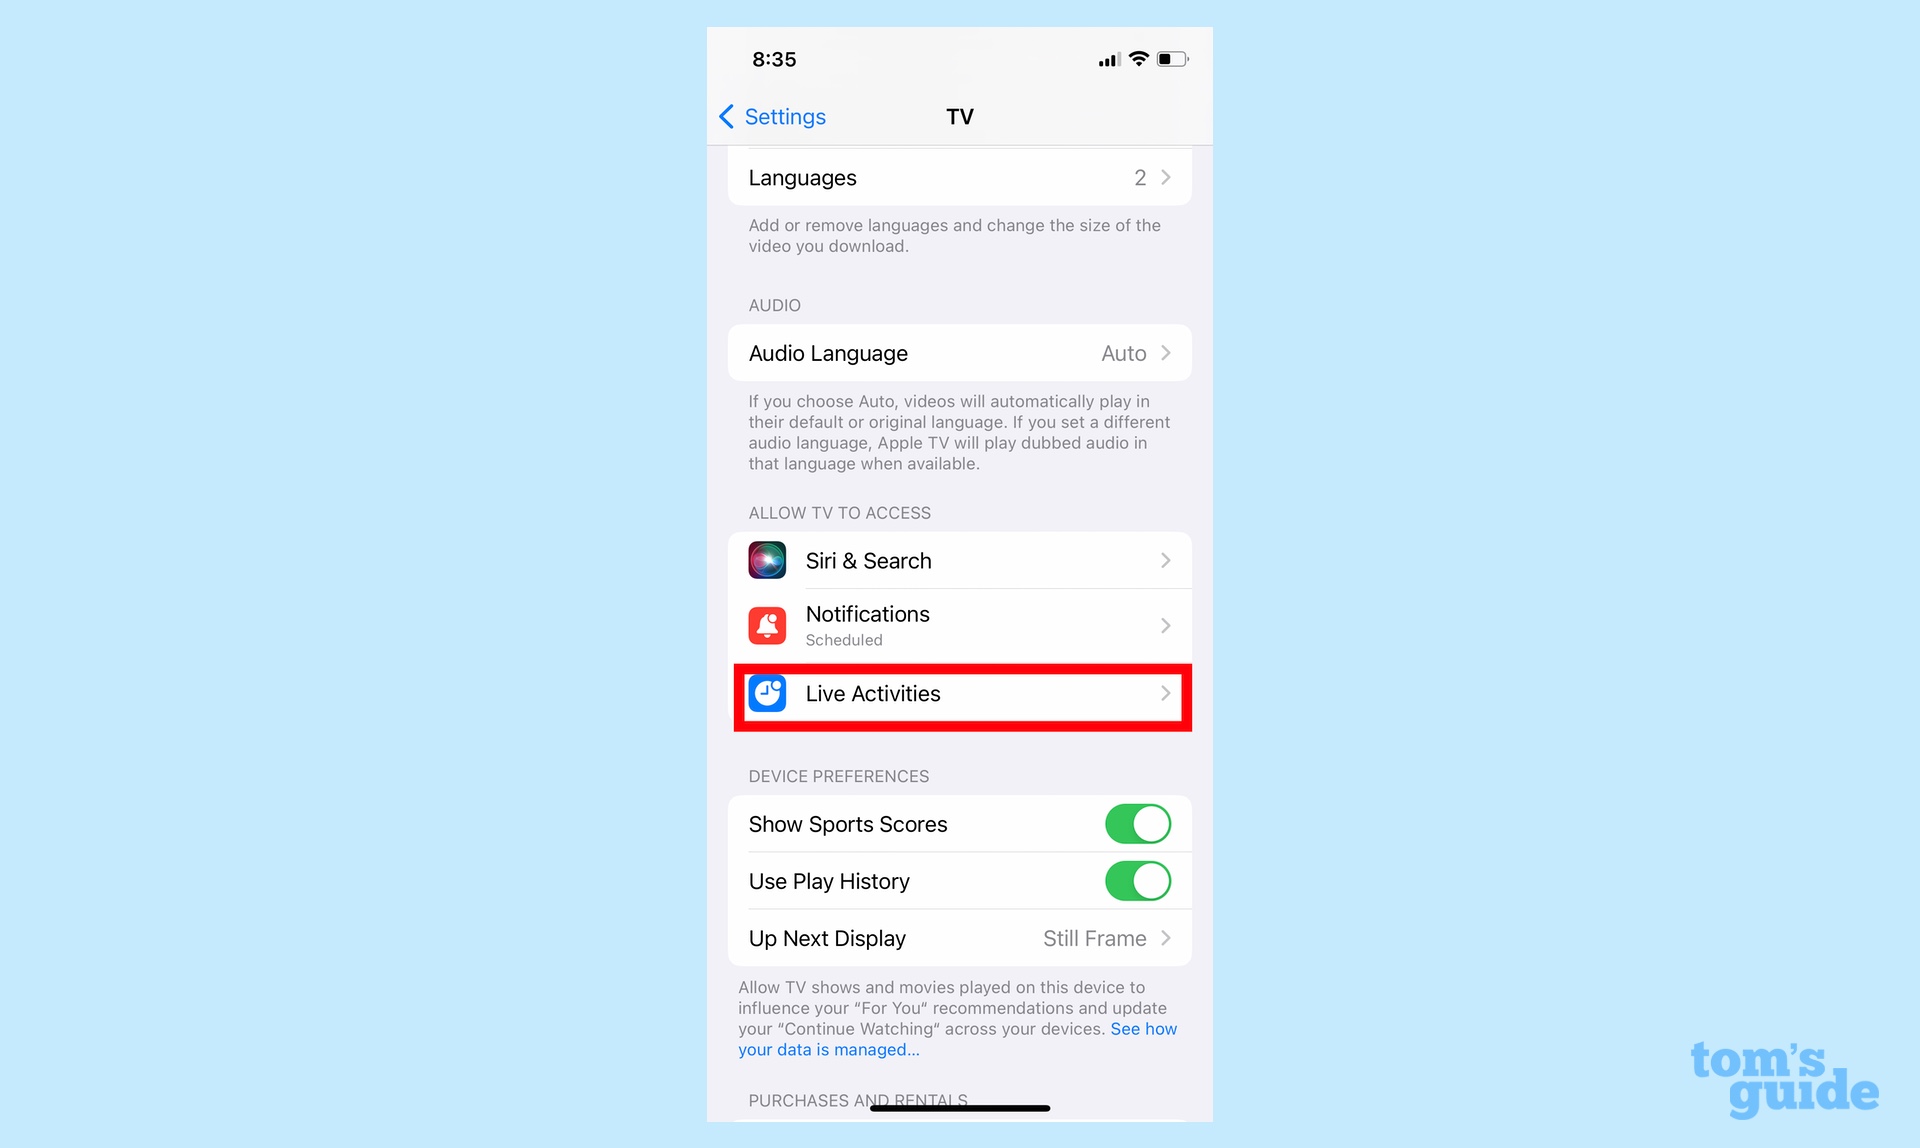 To adjust the frequency, select Live Activities in the app settings